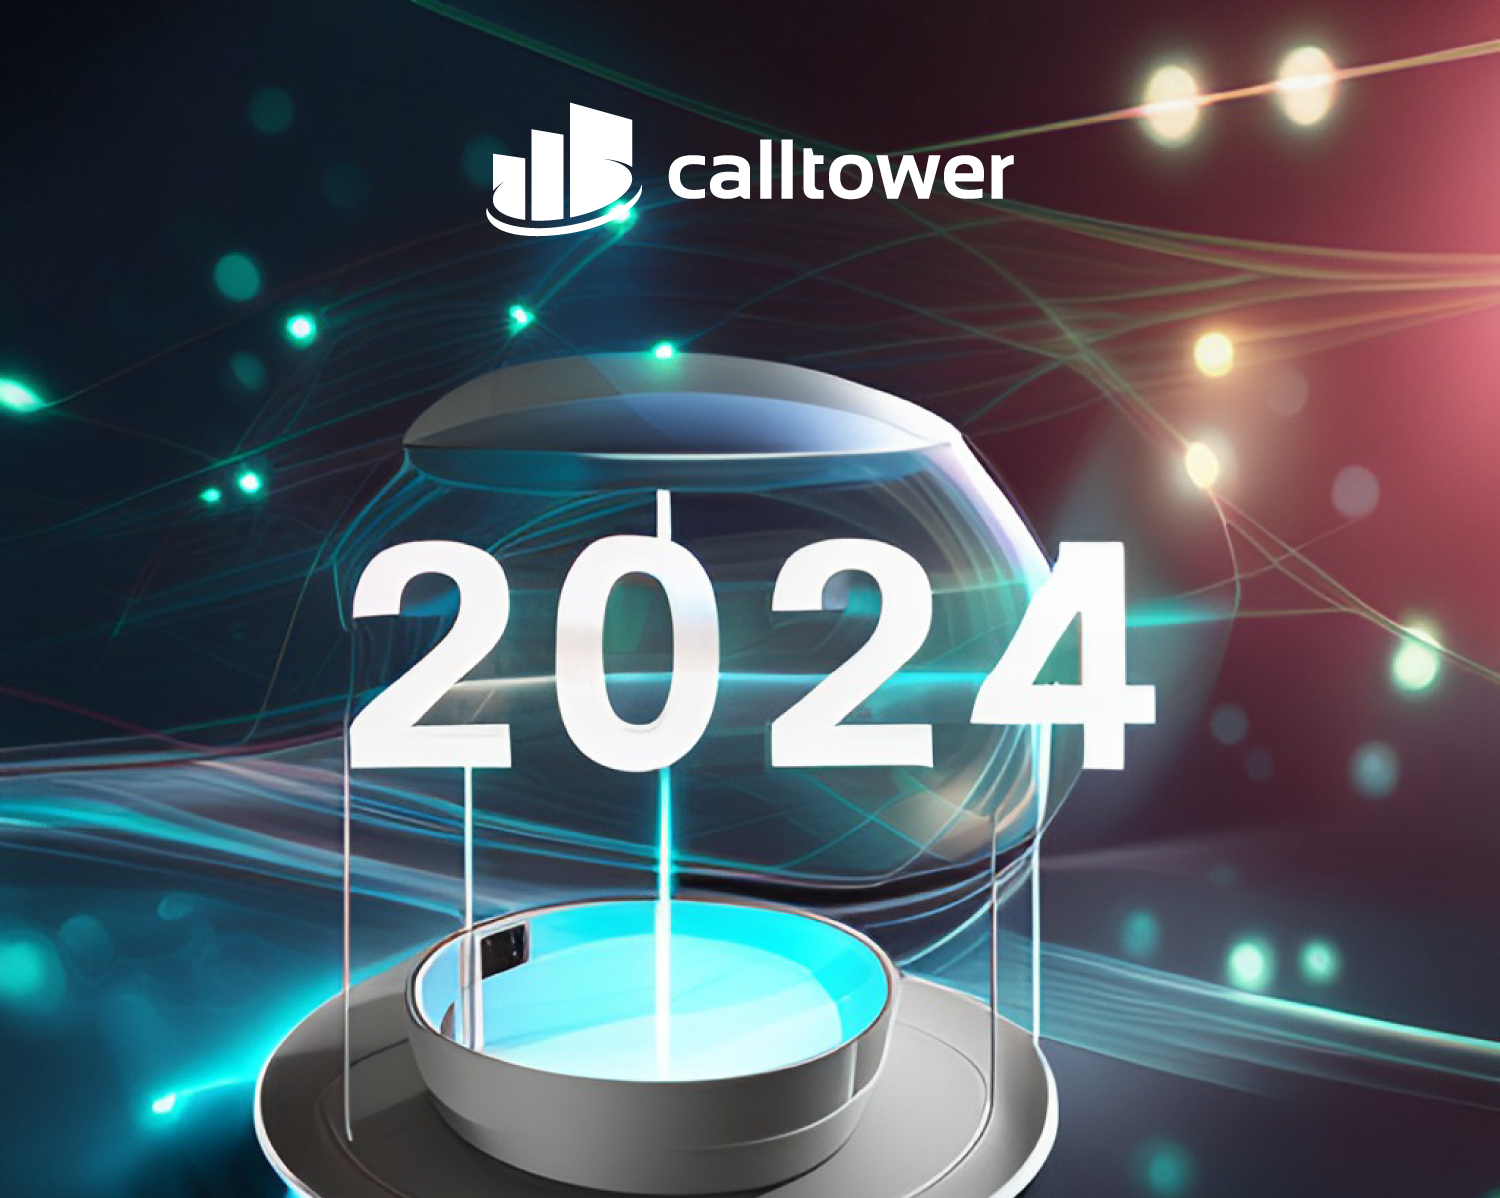 a glass dome with numbers and a blue light with calltower logo